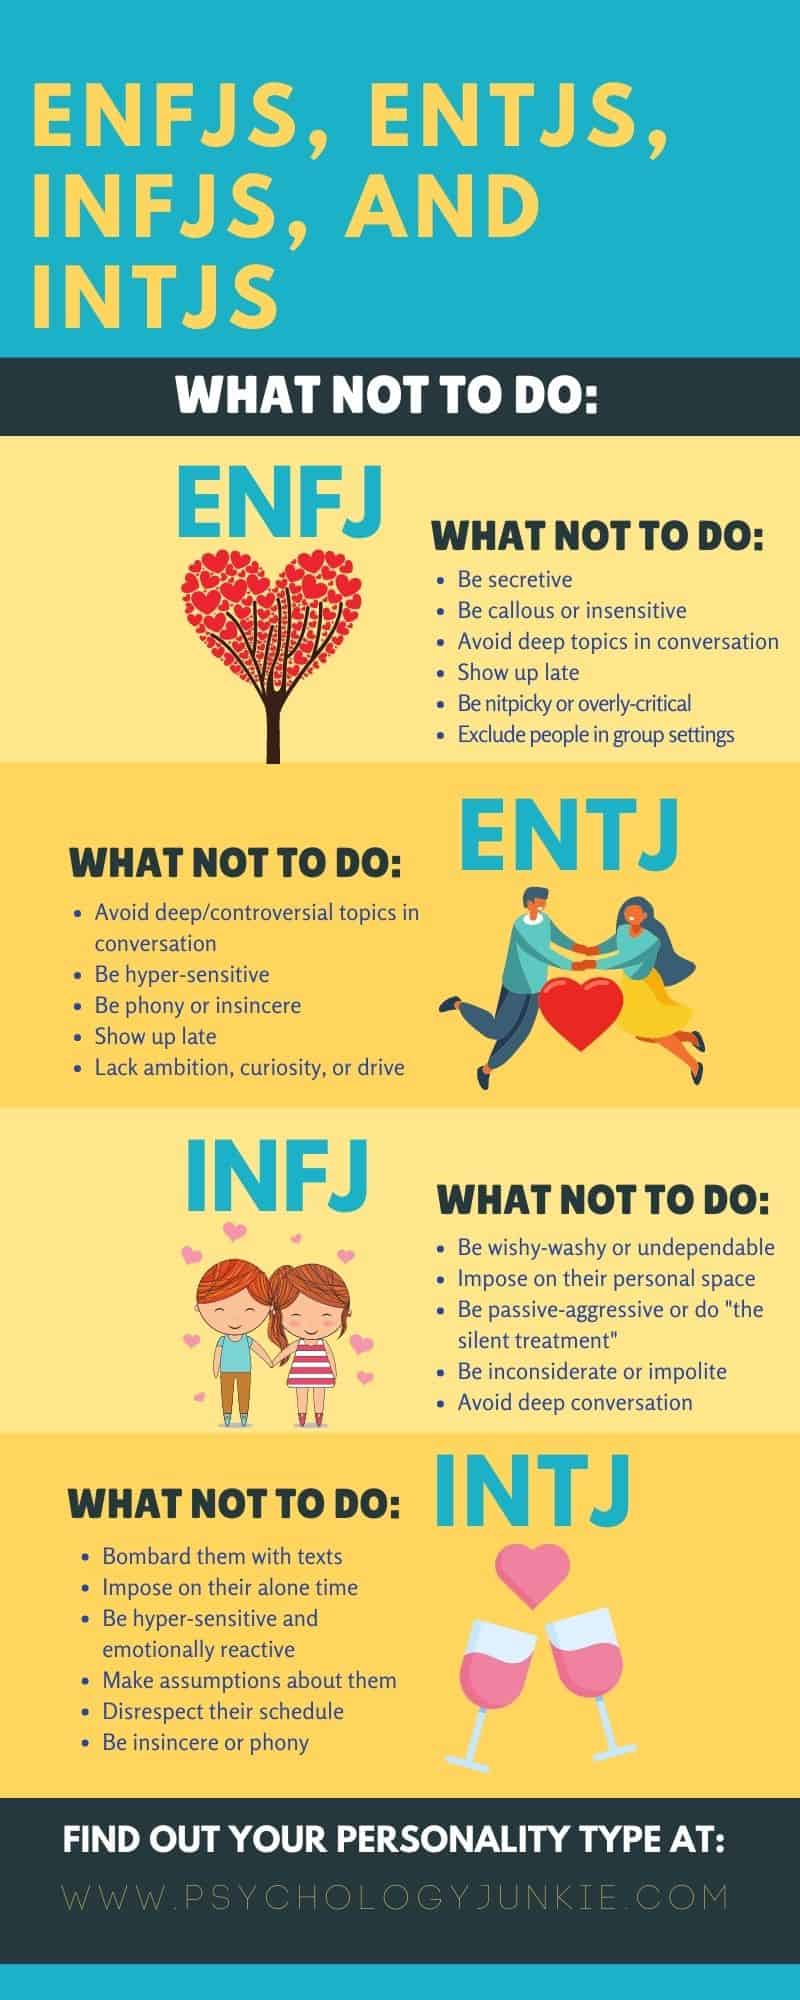 Your Biggest Relationship Fear Based On Your Myers Briggs Personality Type Psychology Junkie